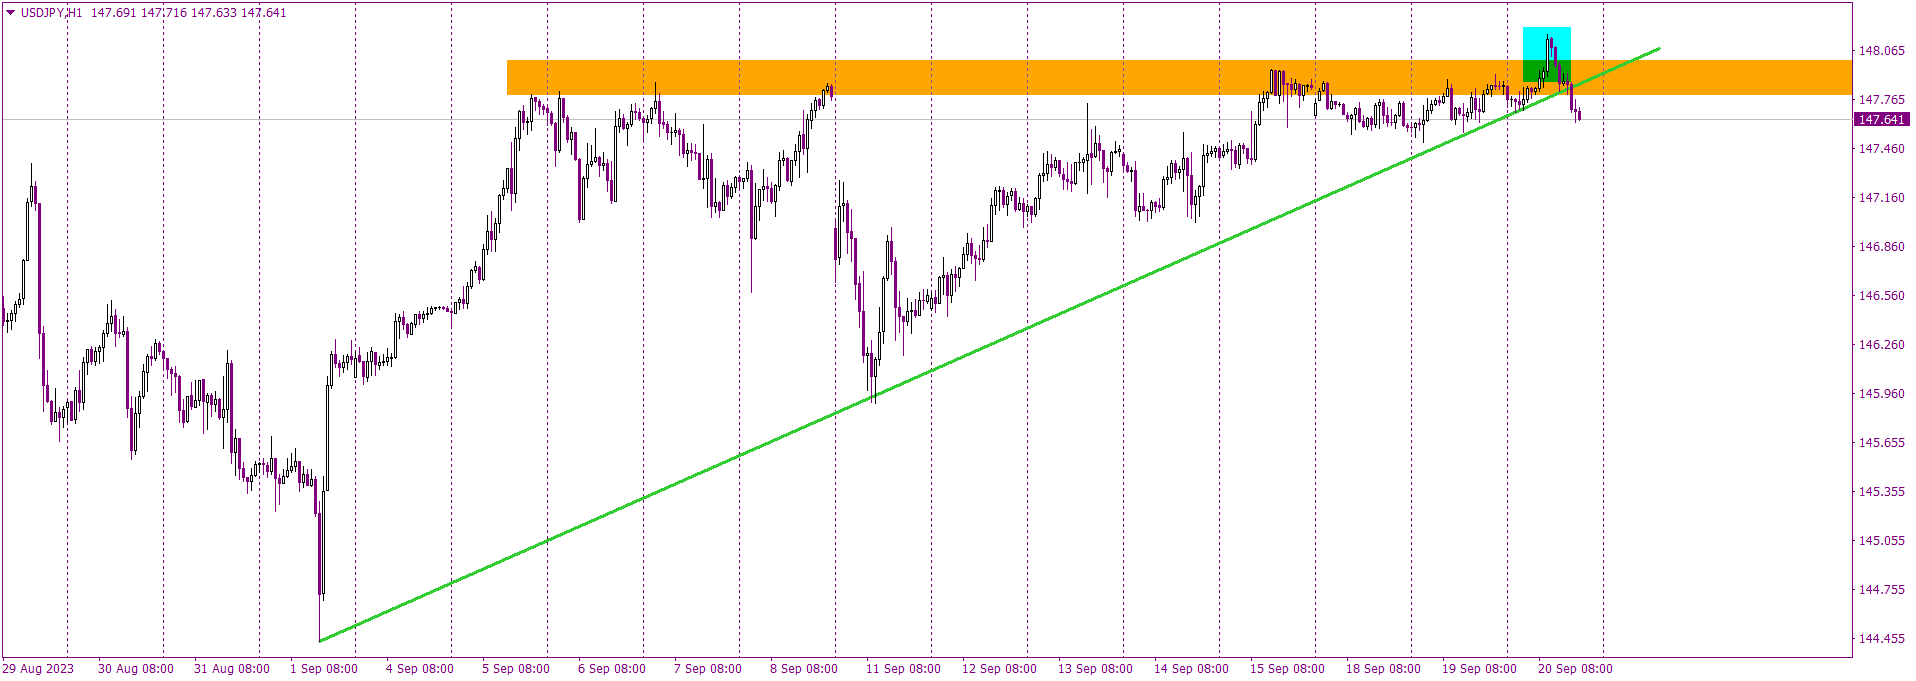 FOMC Approaches. How Will USDJPY Respond?